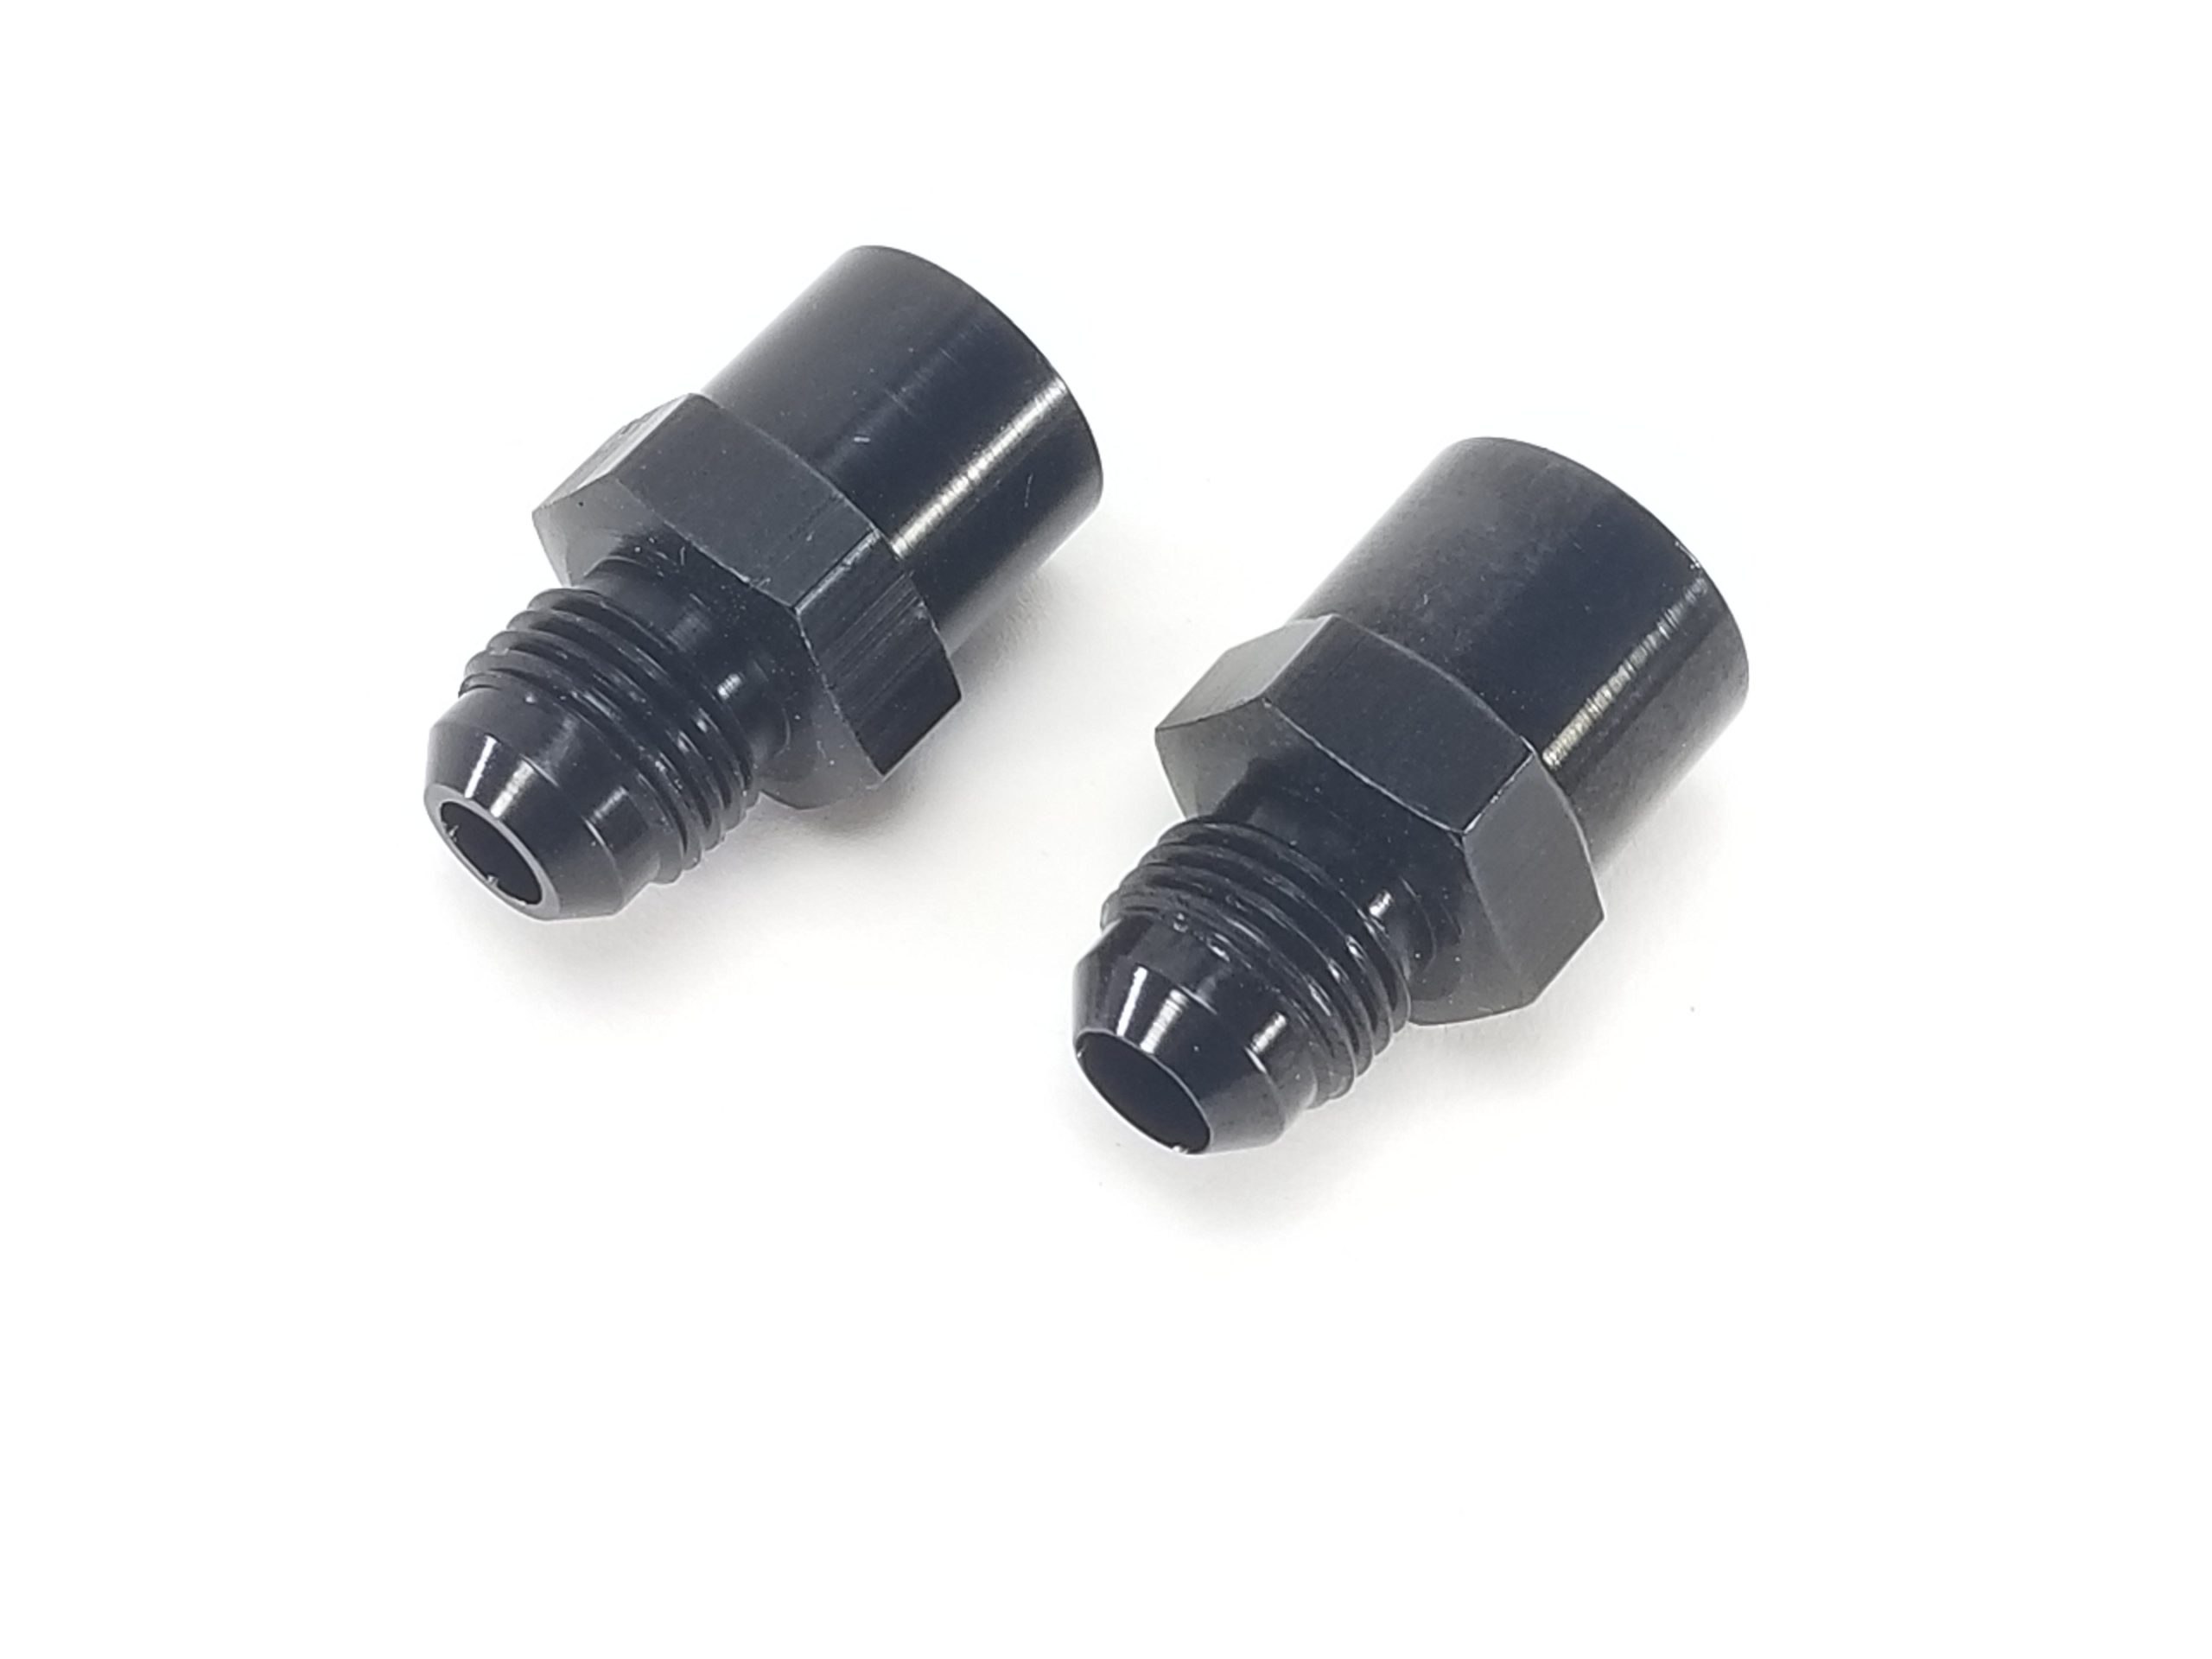 Black -6AN Adapter Fitting Set for GM TBI Style (Metric O-Ring) Fuel Sending Units - 47-0001